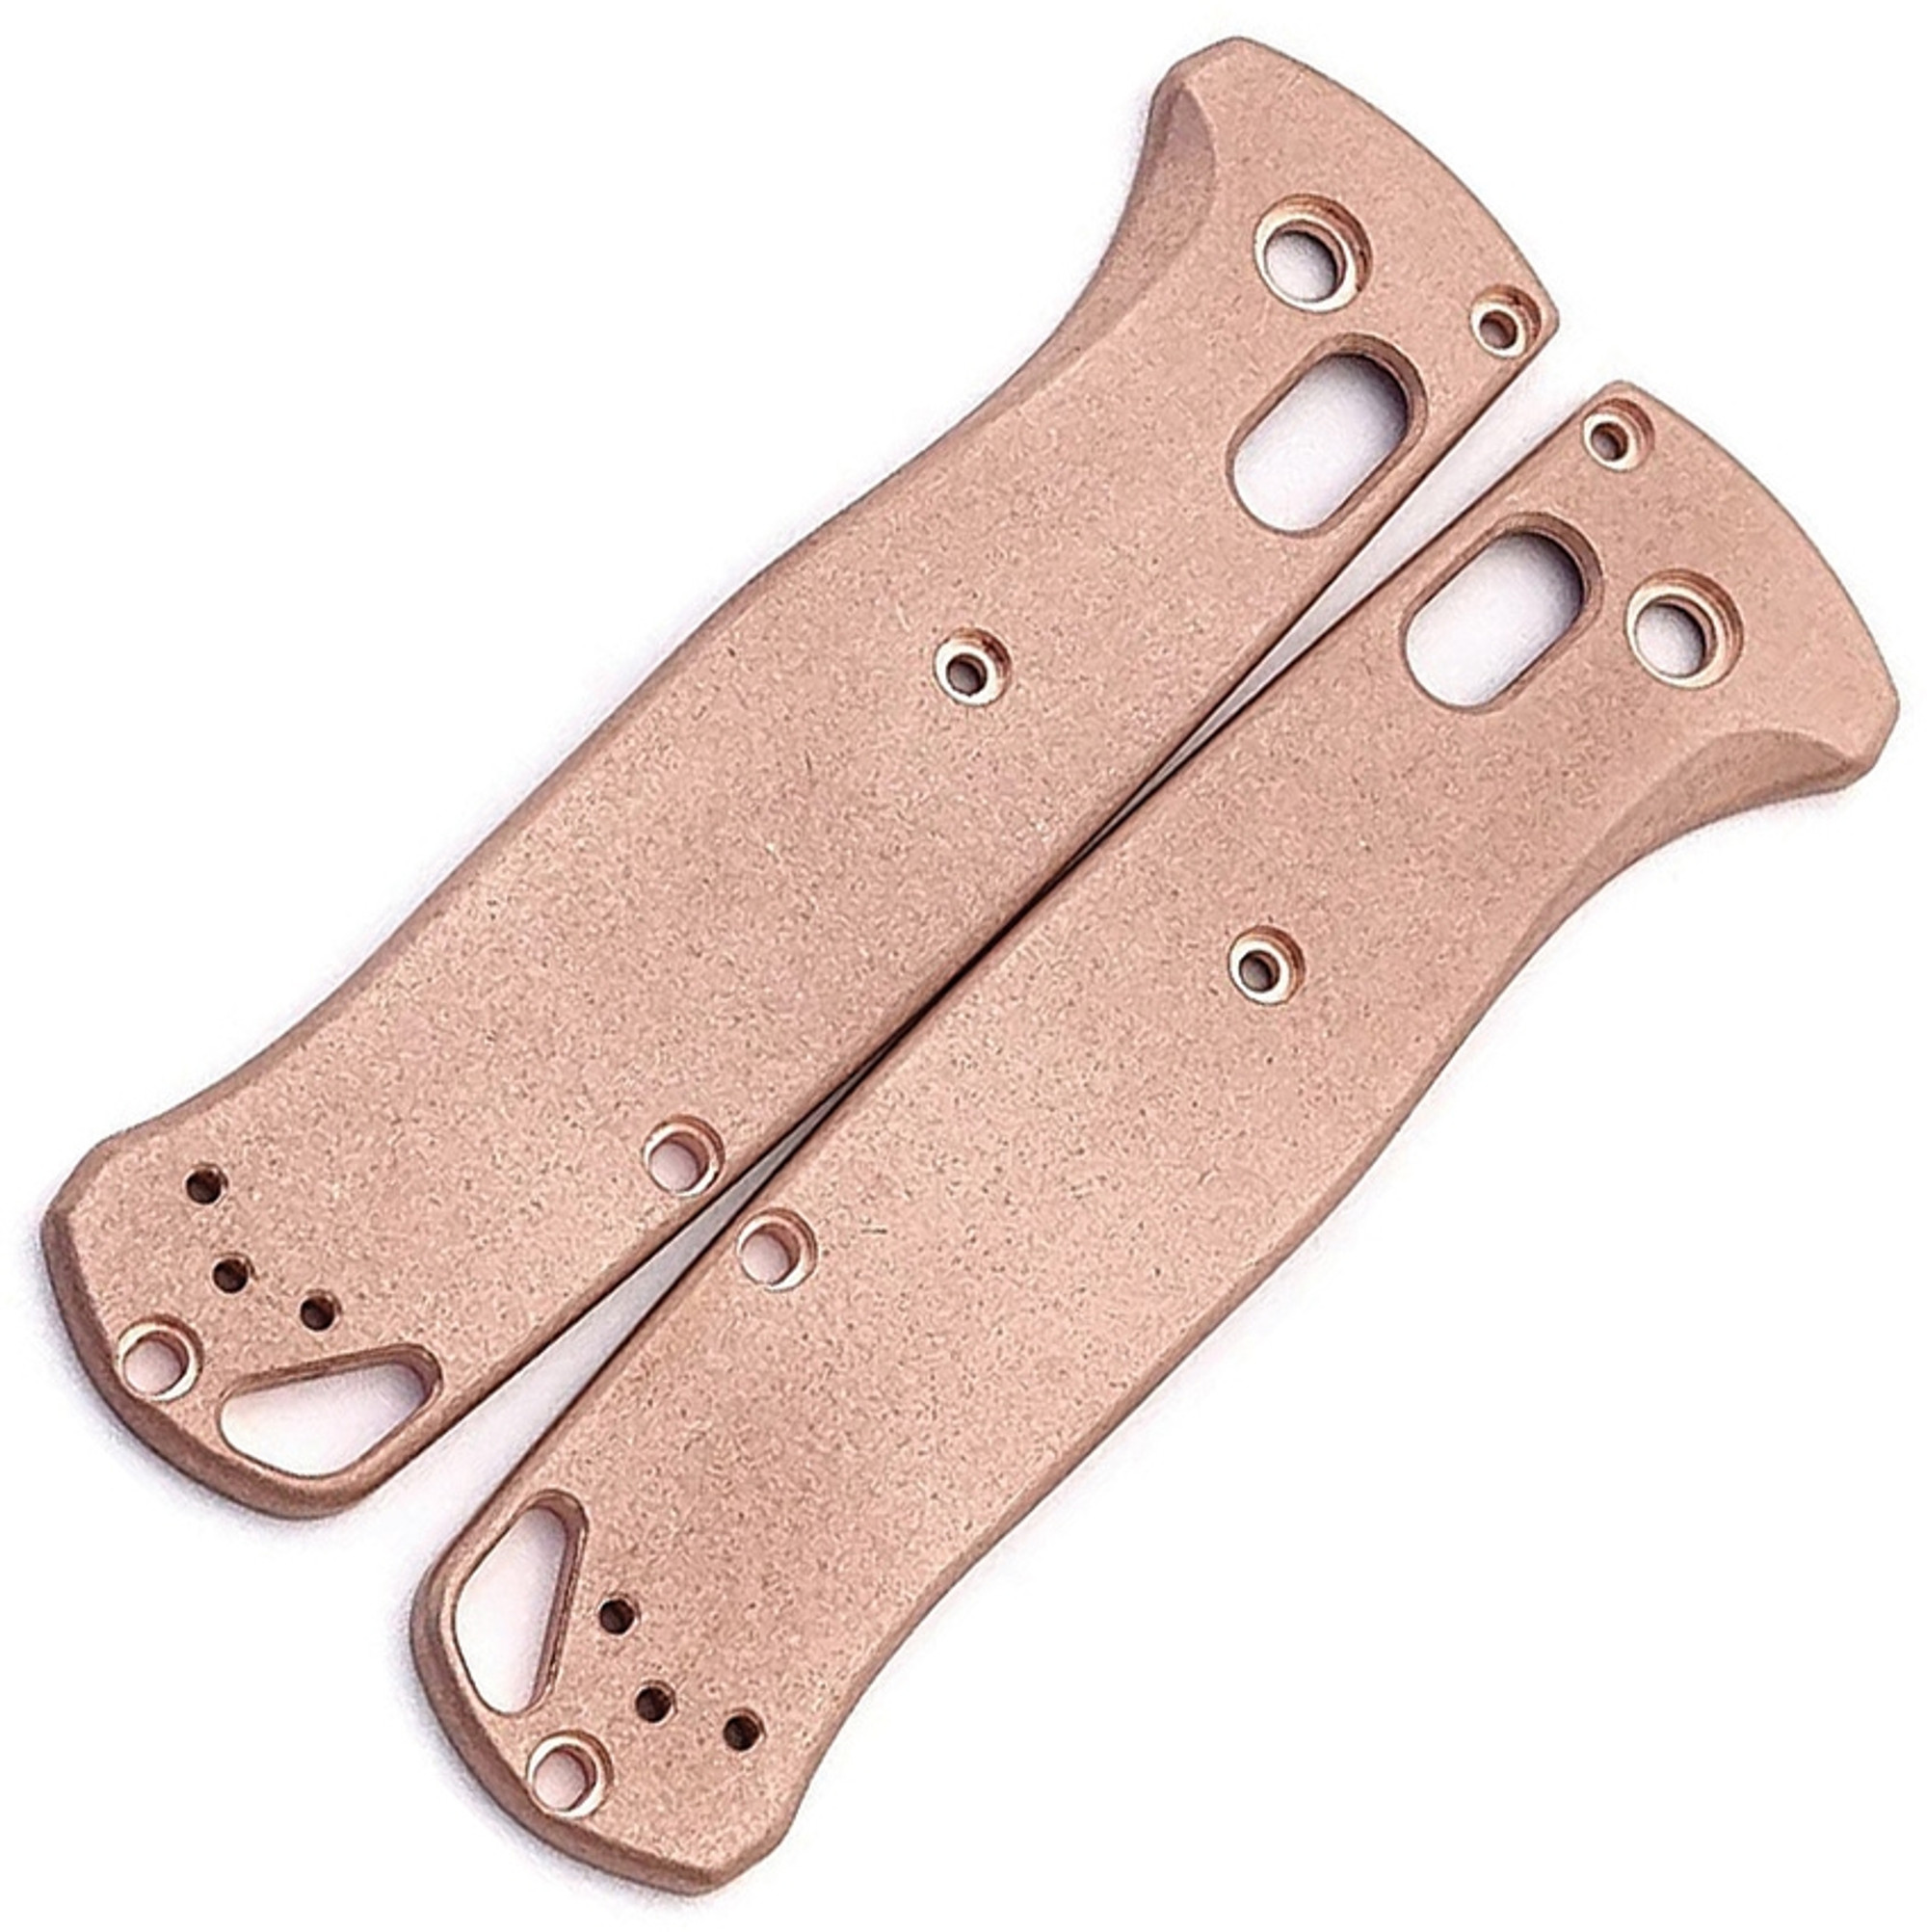 Bugout Scales Copper FLY545